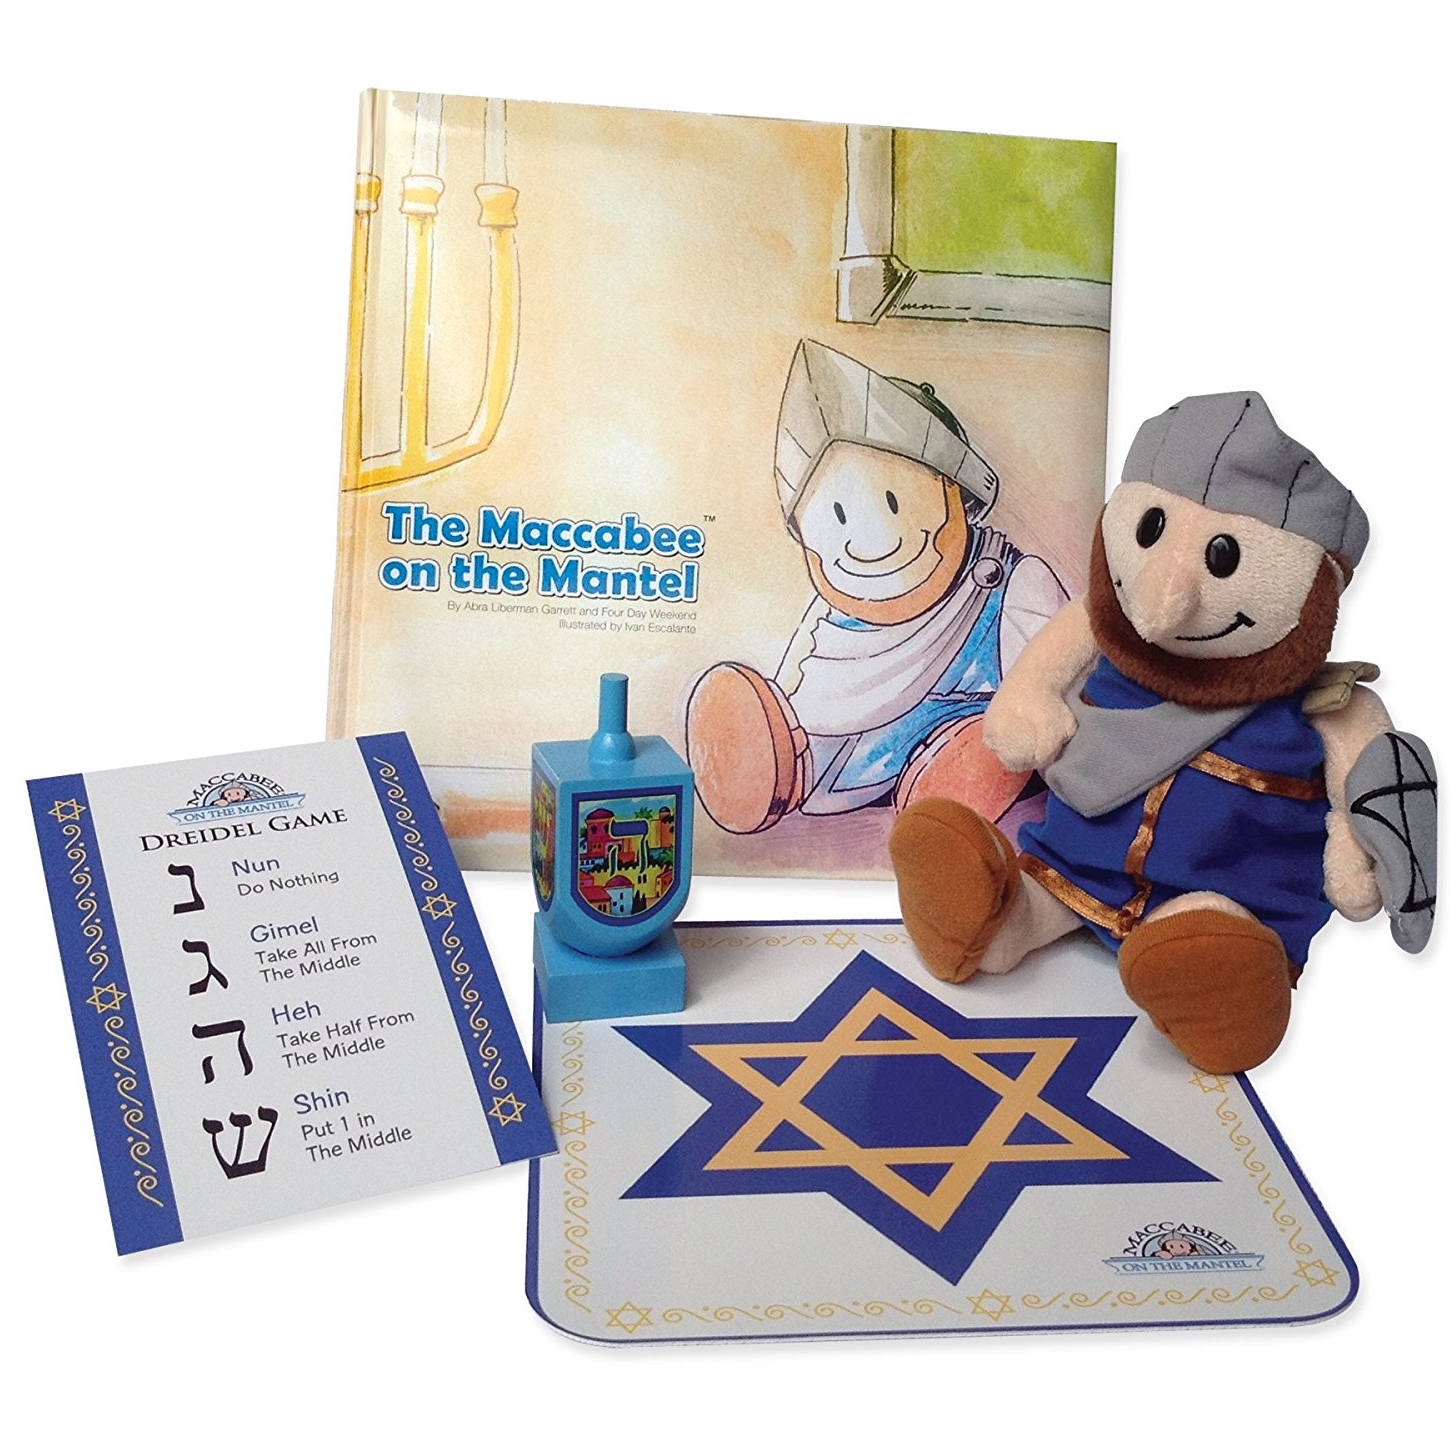 Maccabee’s Hanukkah Gift Set Only $17.47 Shipped!